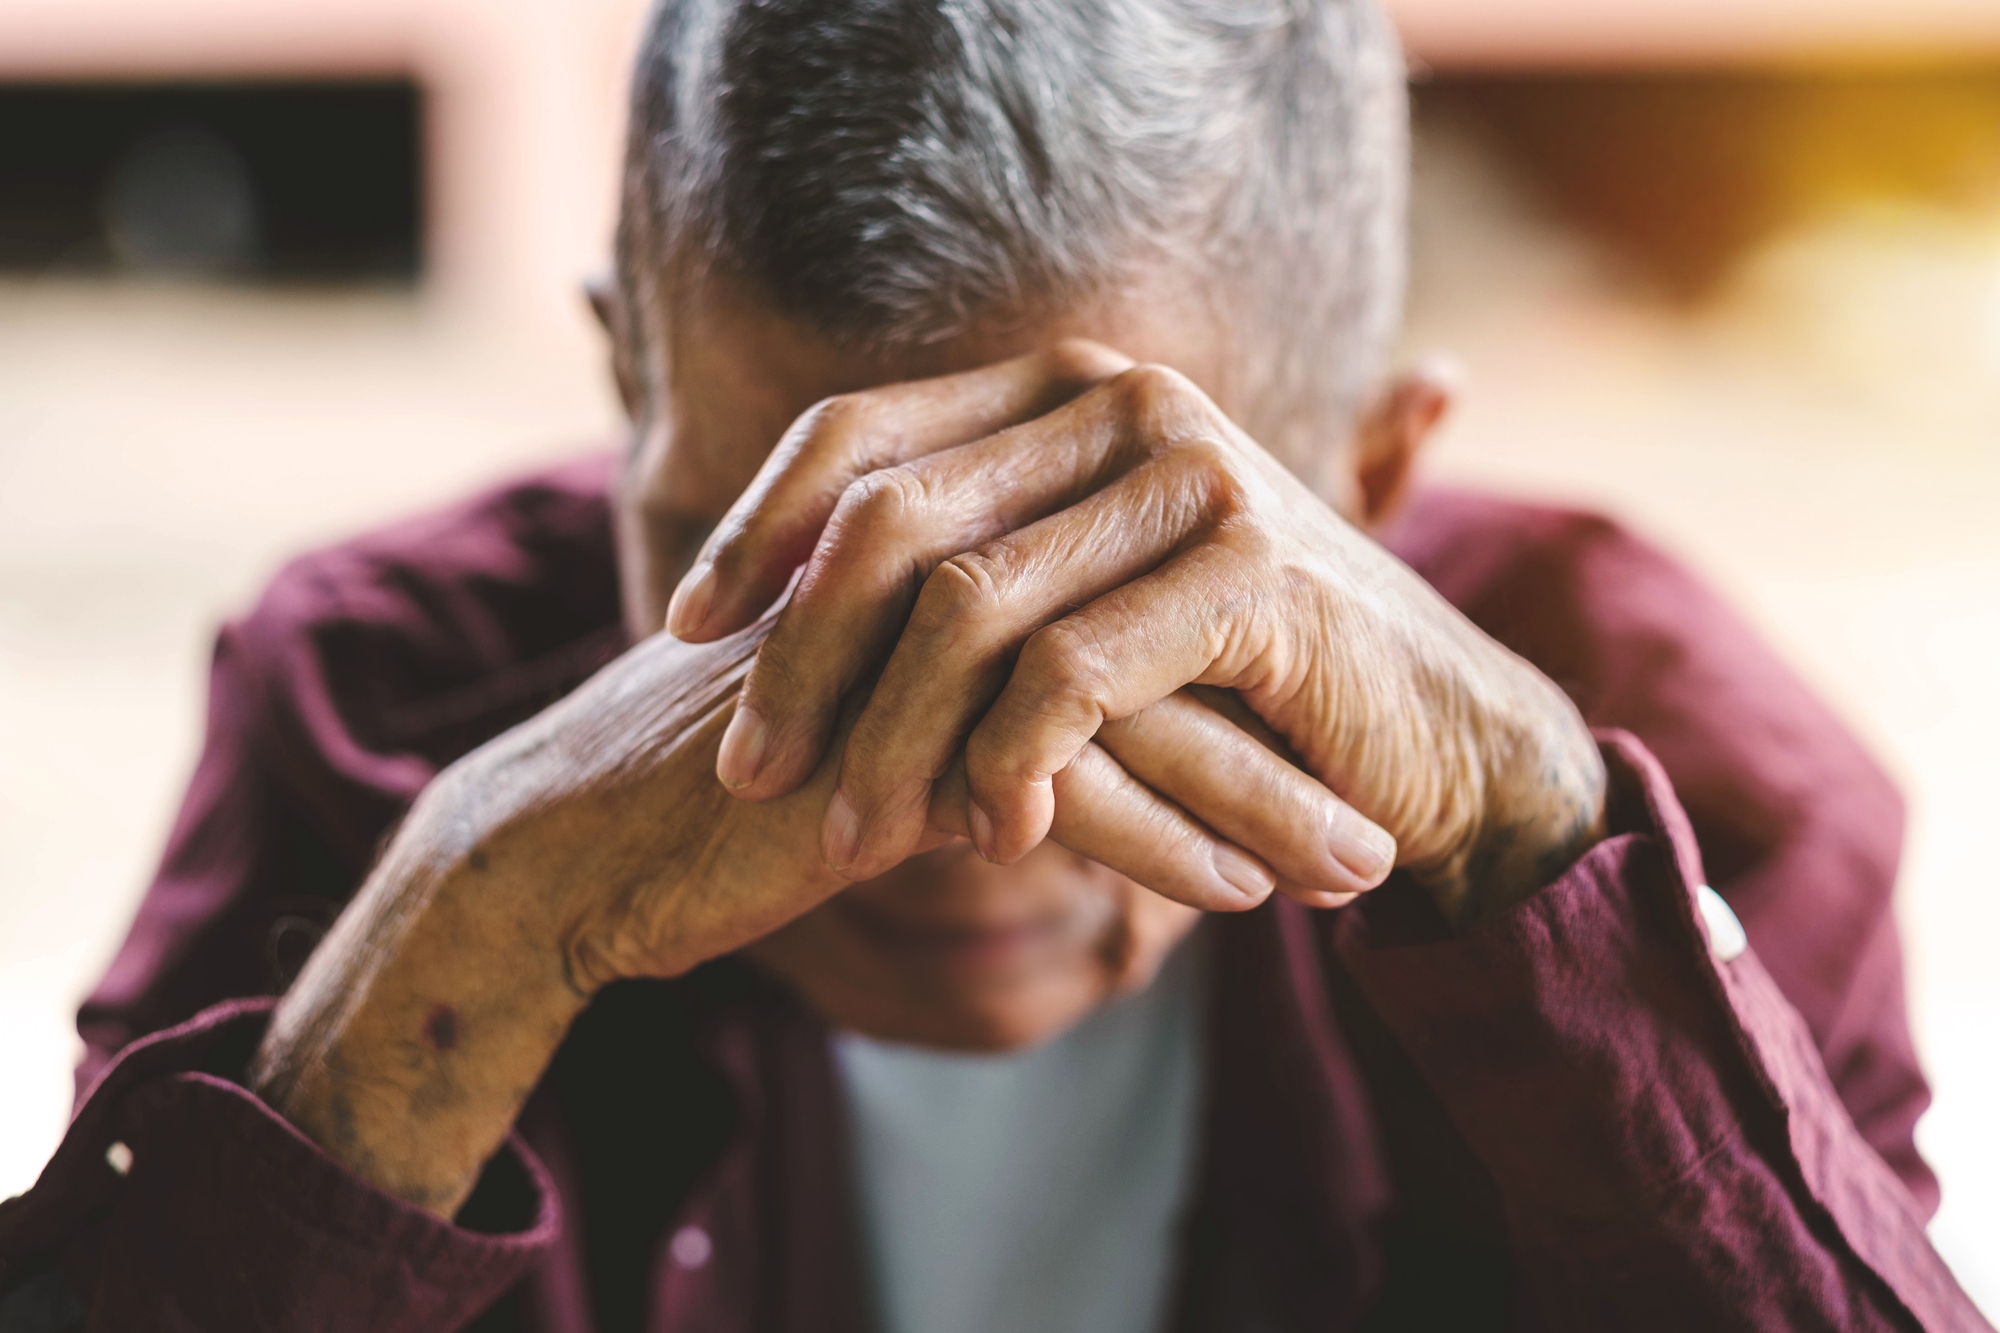 Elderly People are often financially abused by family